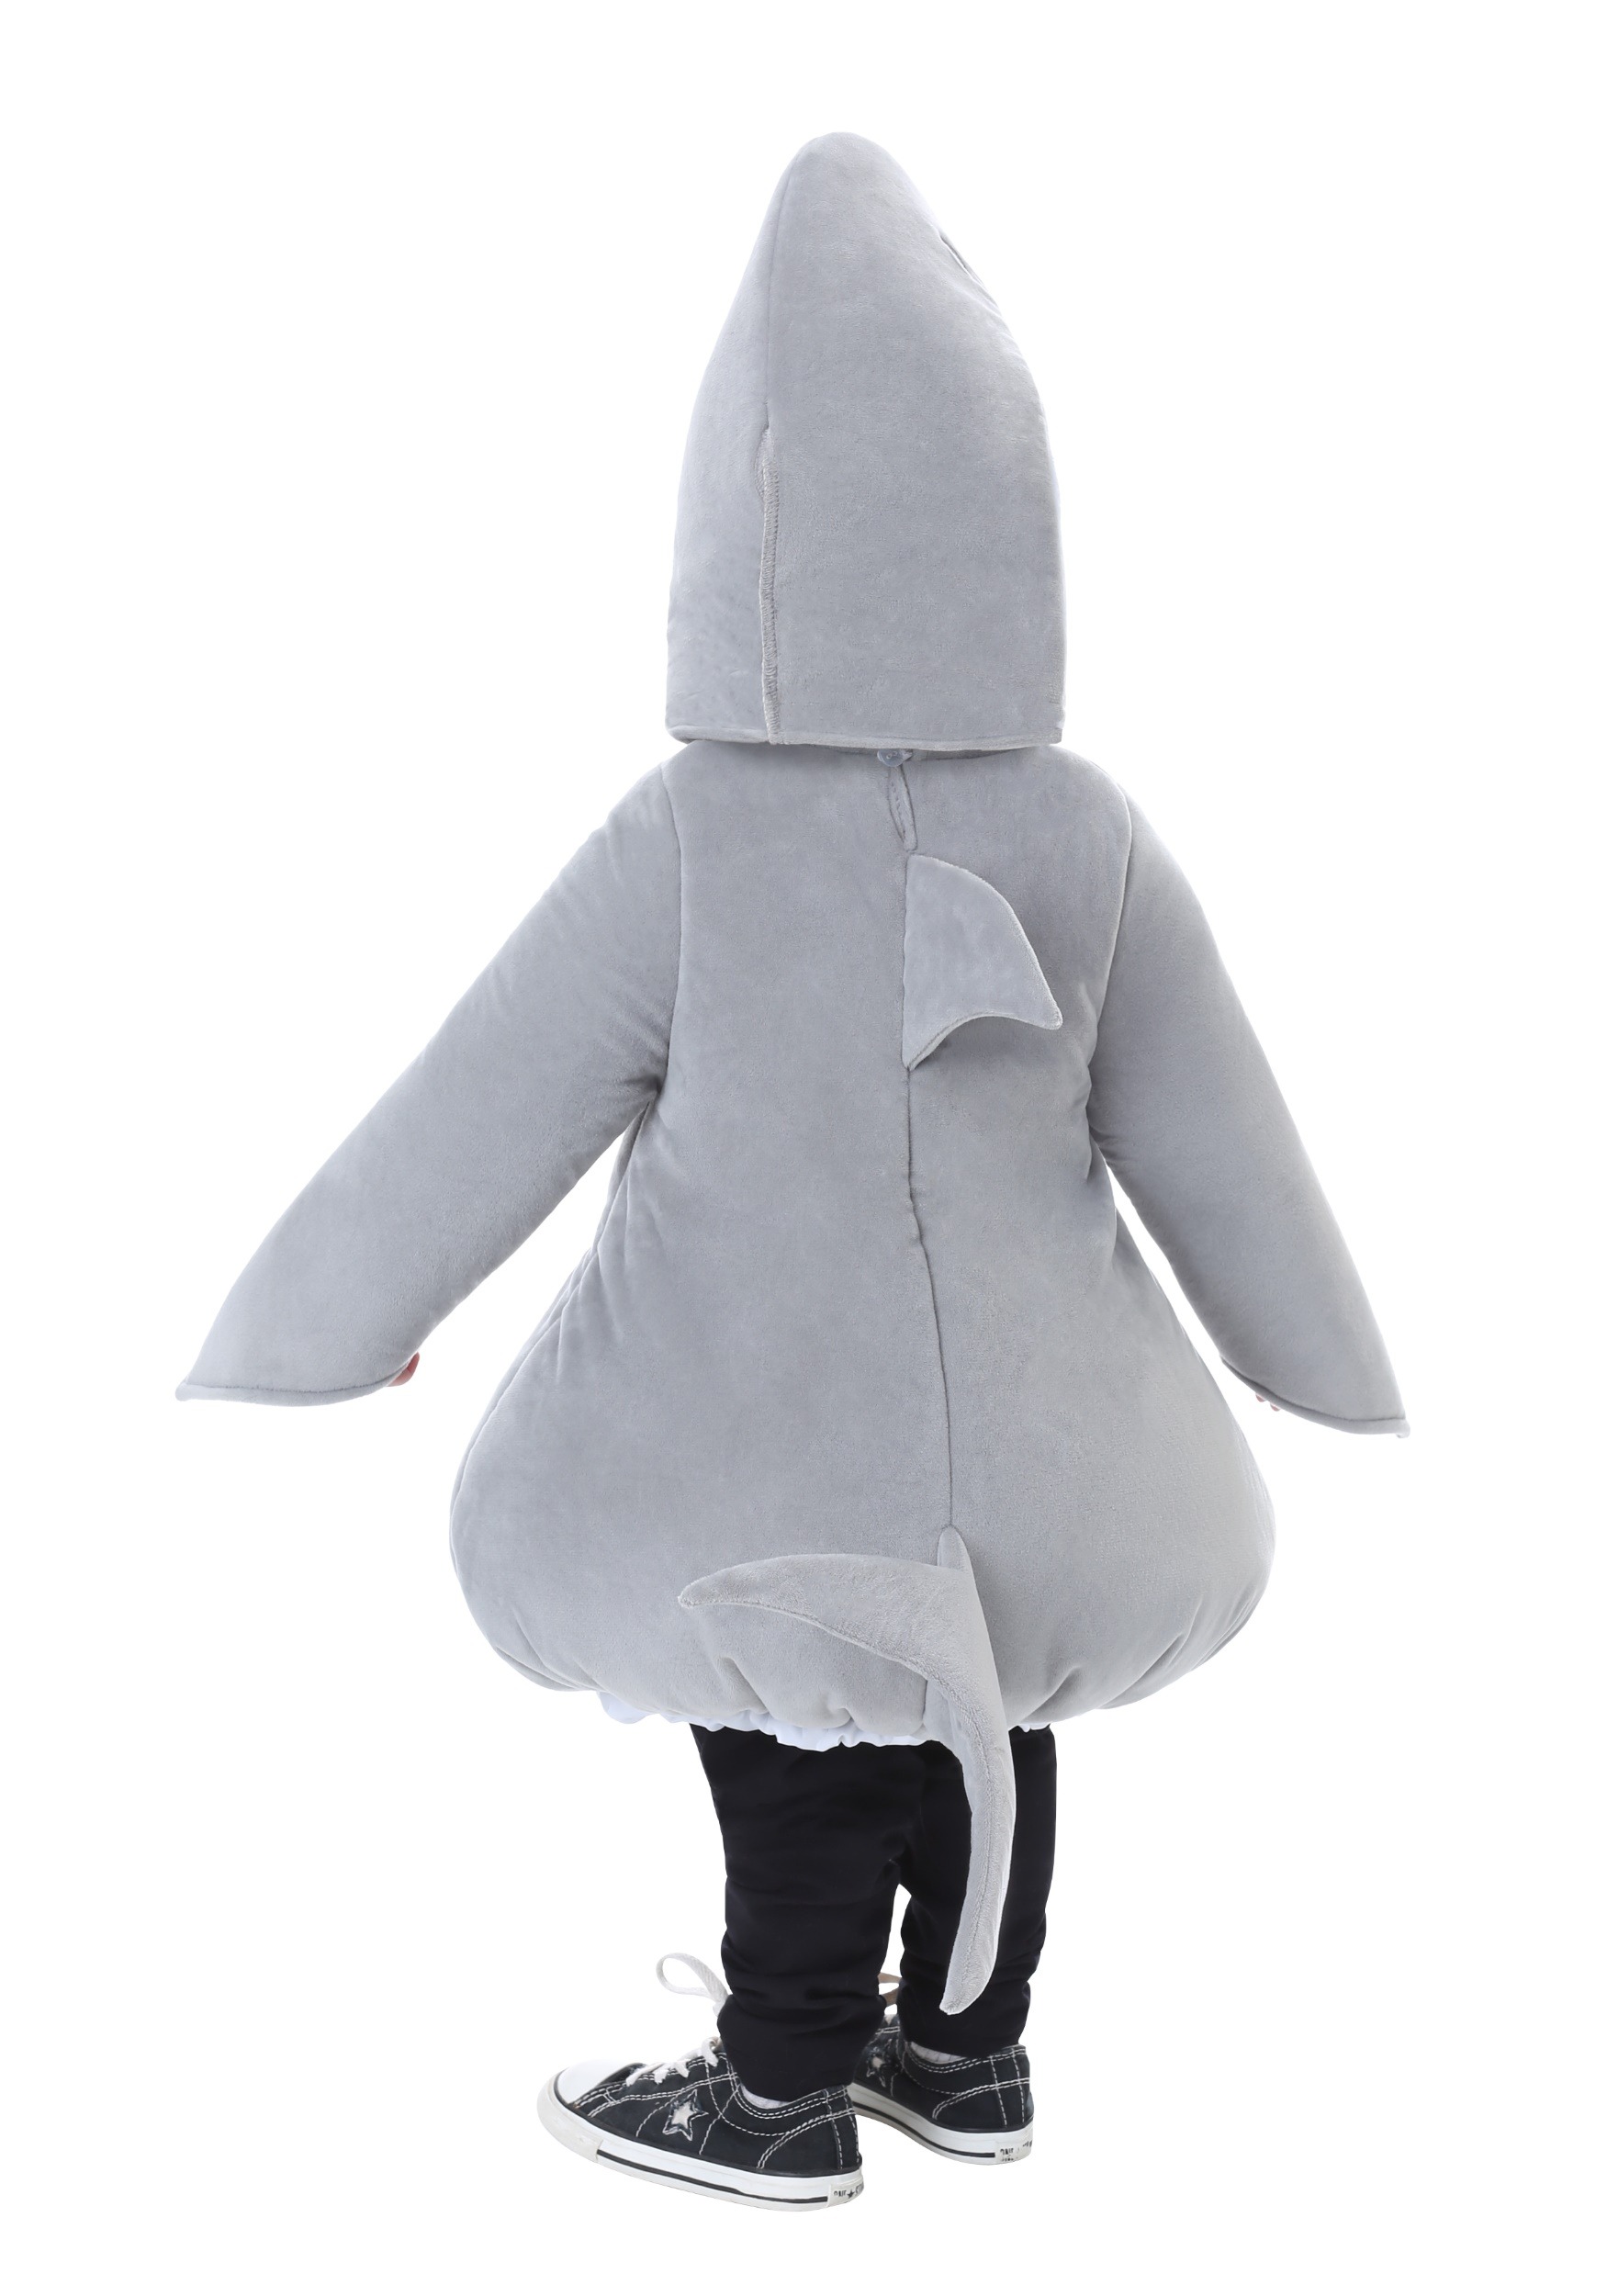 Bubble Shark Costume For Toddlers , Ocean Costumes